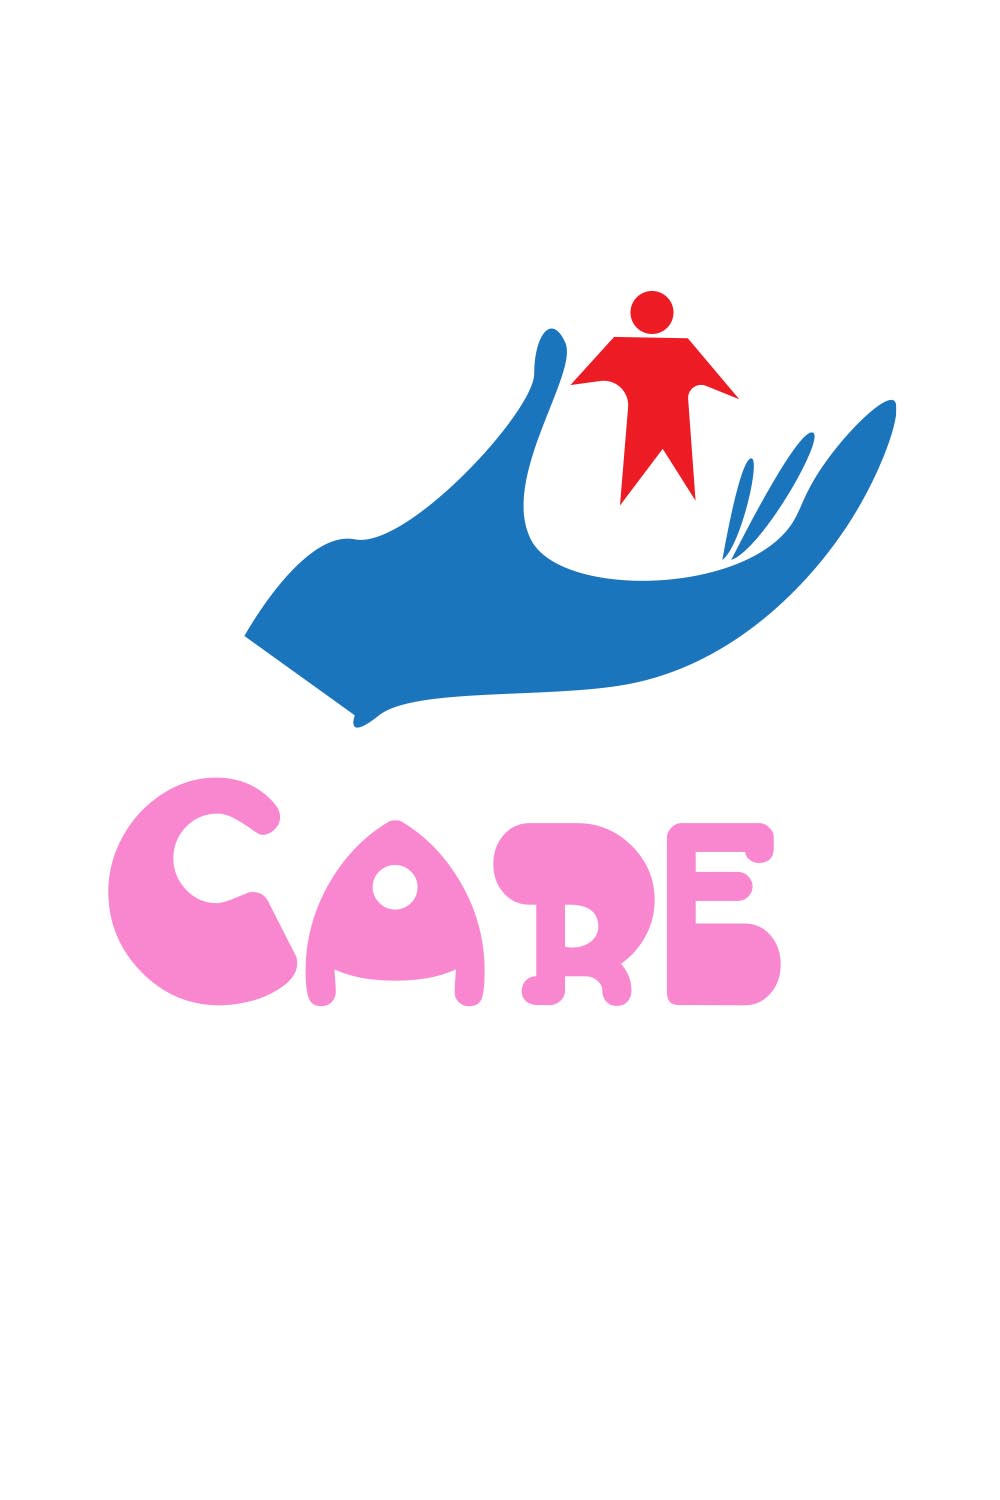 Care minimalist logo or company flat logo pinterest preview image.